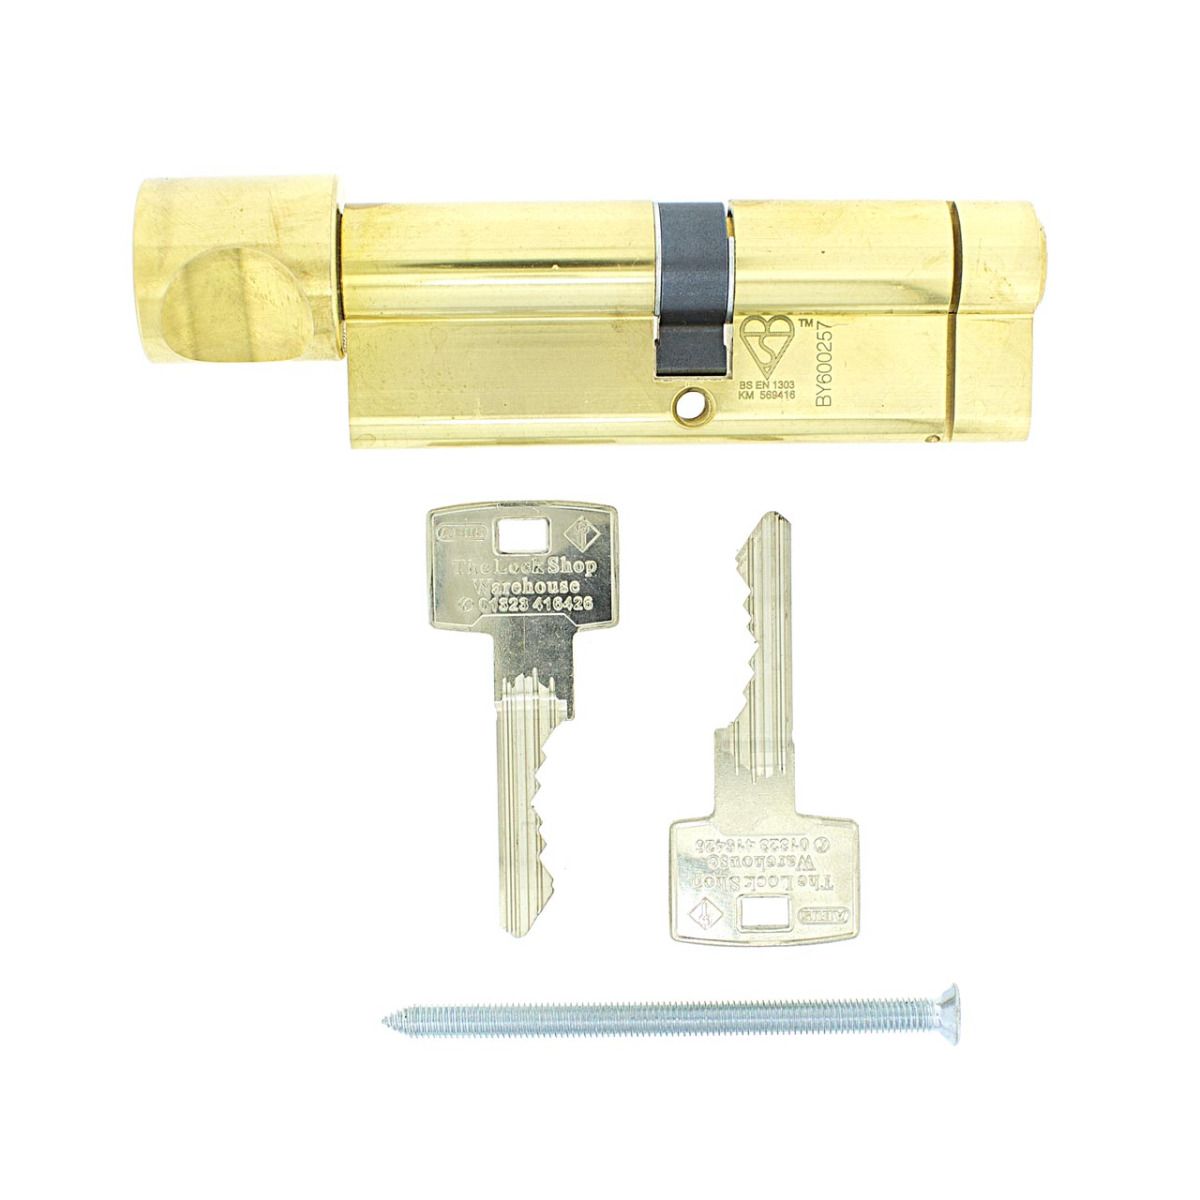 Dimensions Image: ABUS Pfaffenhain Euro Double Cylinder With Thumbturn Kitemarked